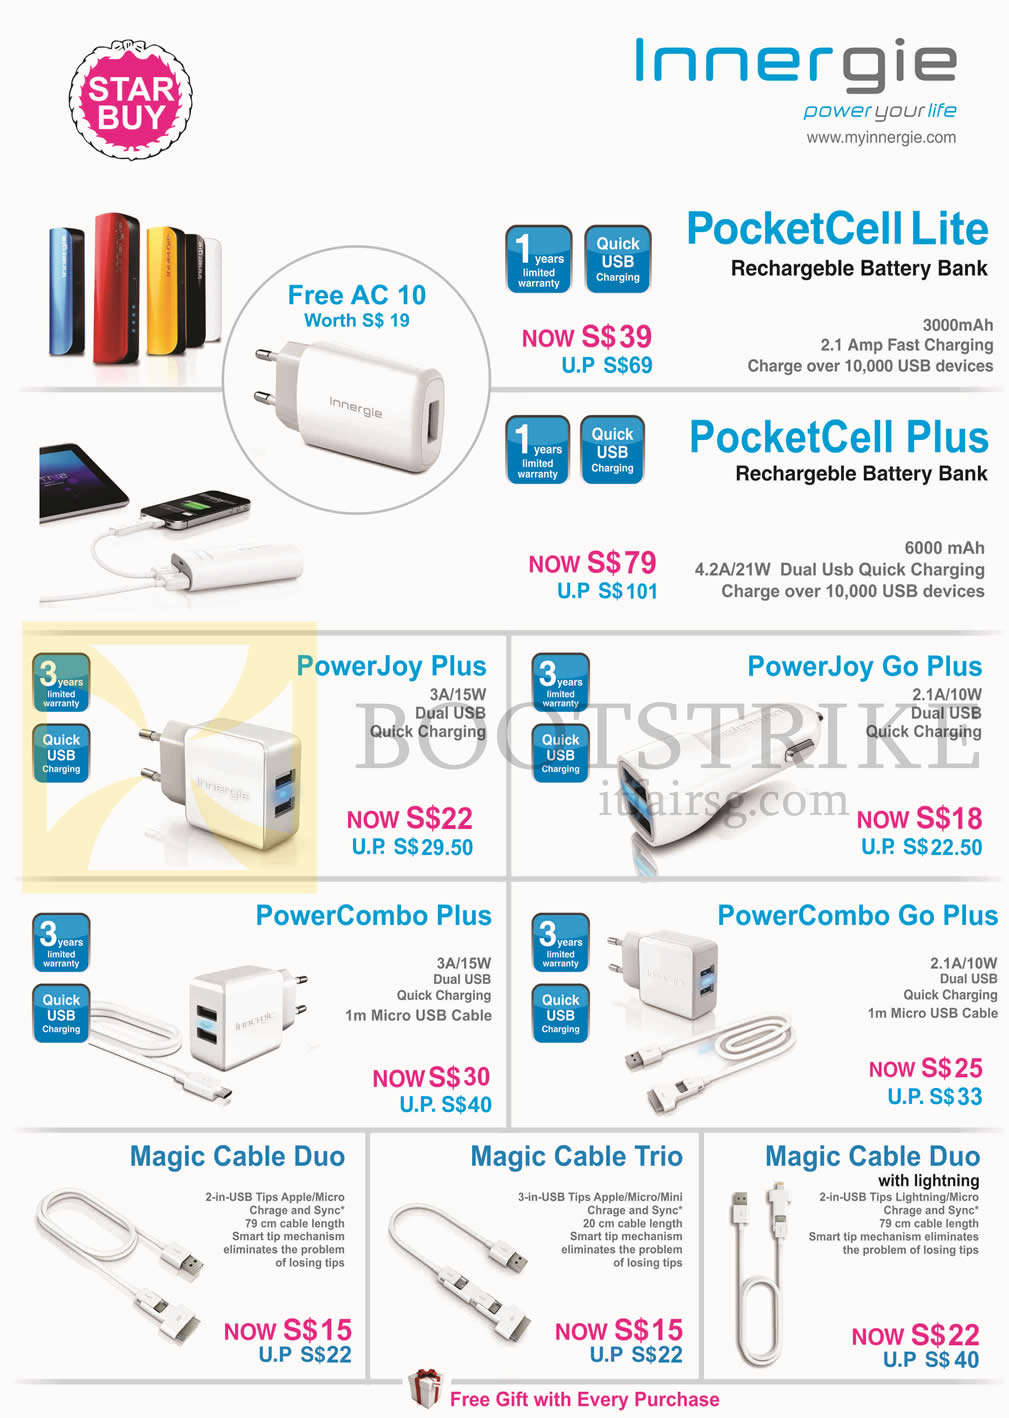 PC SHOW 2015 price list image brochure of Innergie Powerbanks, Quick Chargers, Cables, PocketCell Lite, Plus, PowerJoy Plus, PowerComb Plus, Go Plus, Magic Cable Duo, Trio